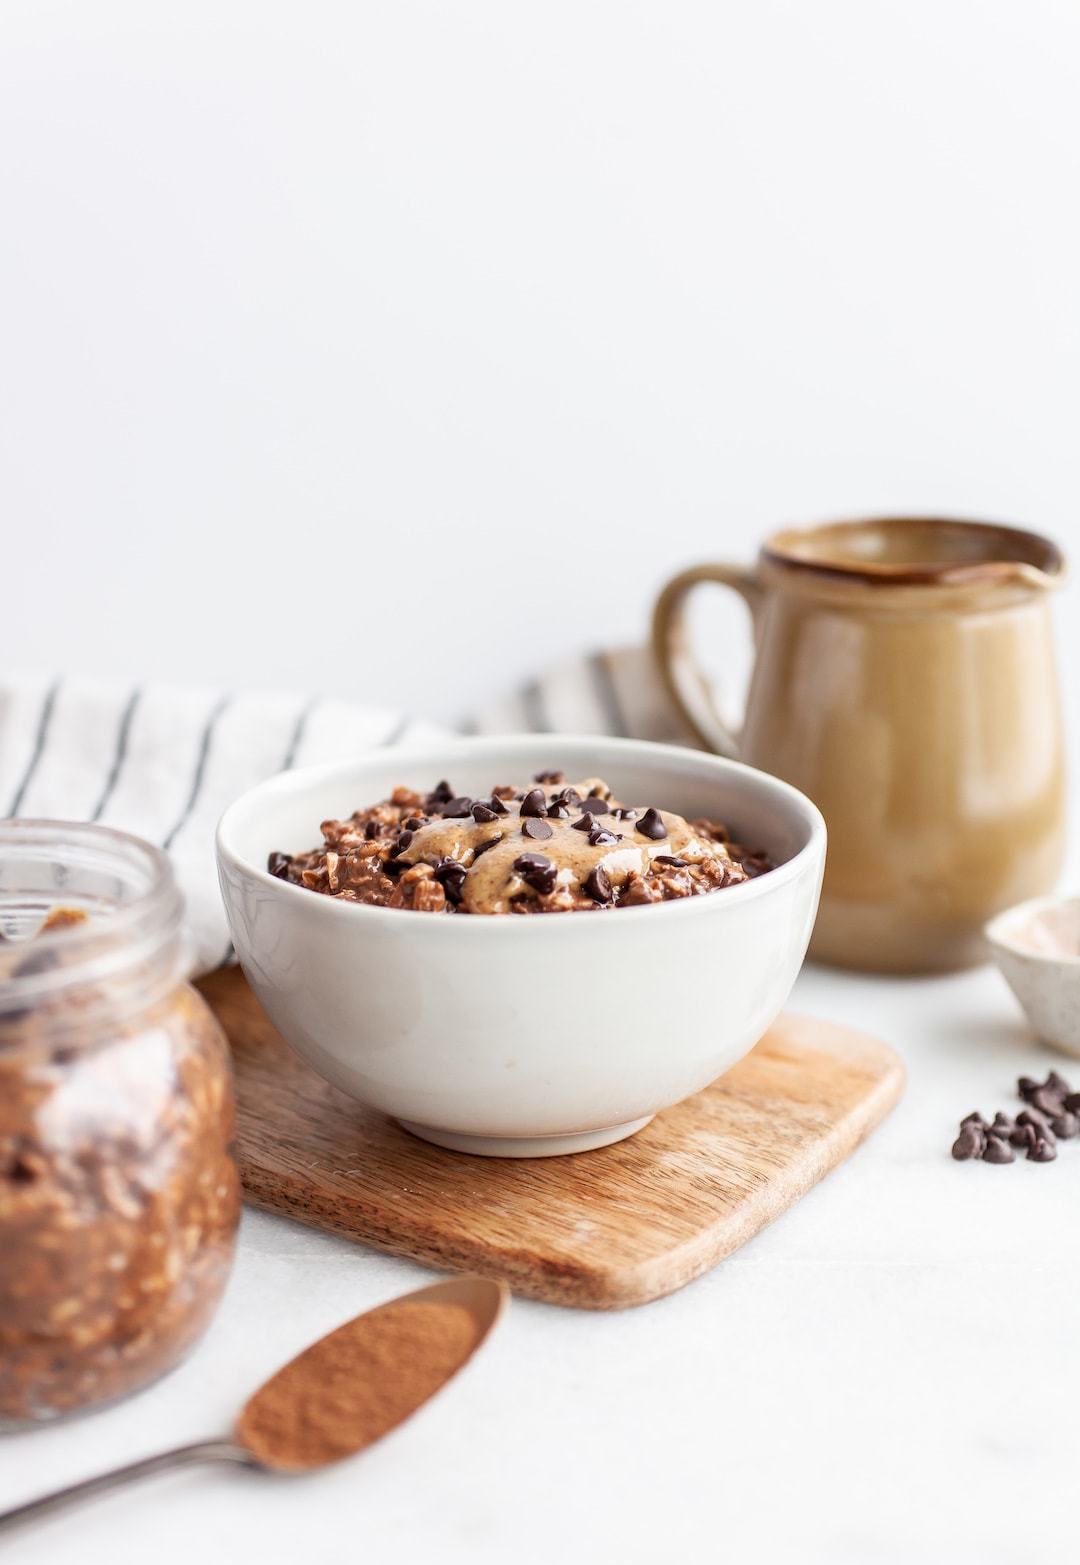 Healthy Chocolate Overnight Oats in a white bowl on a wood tray